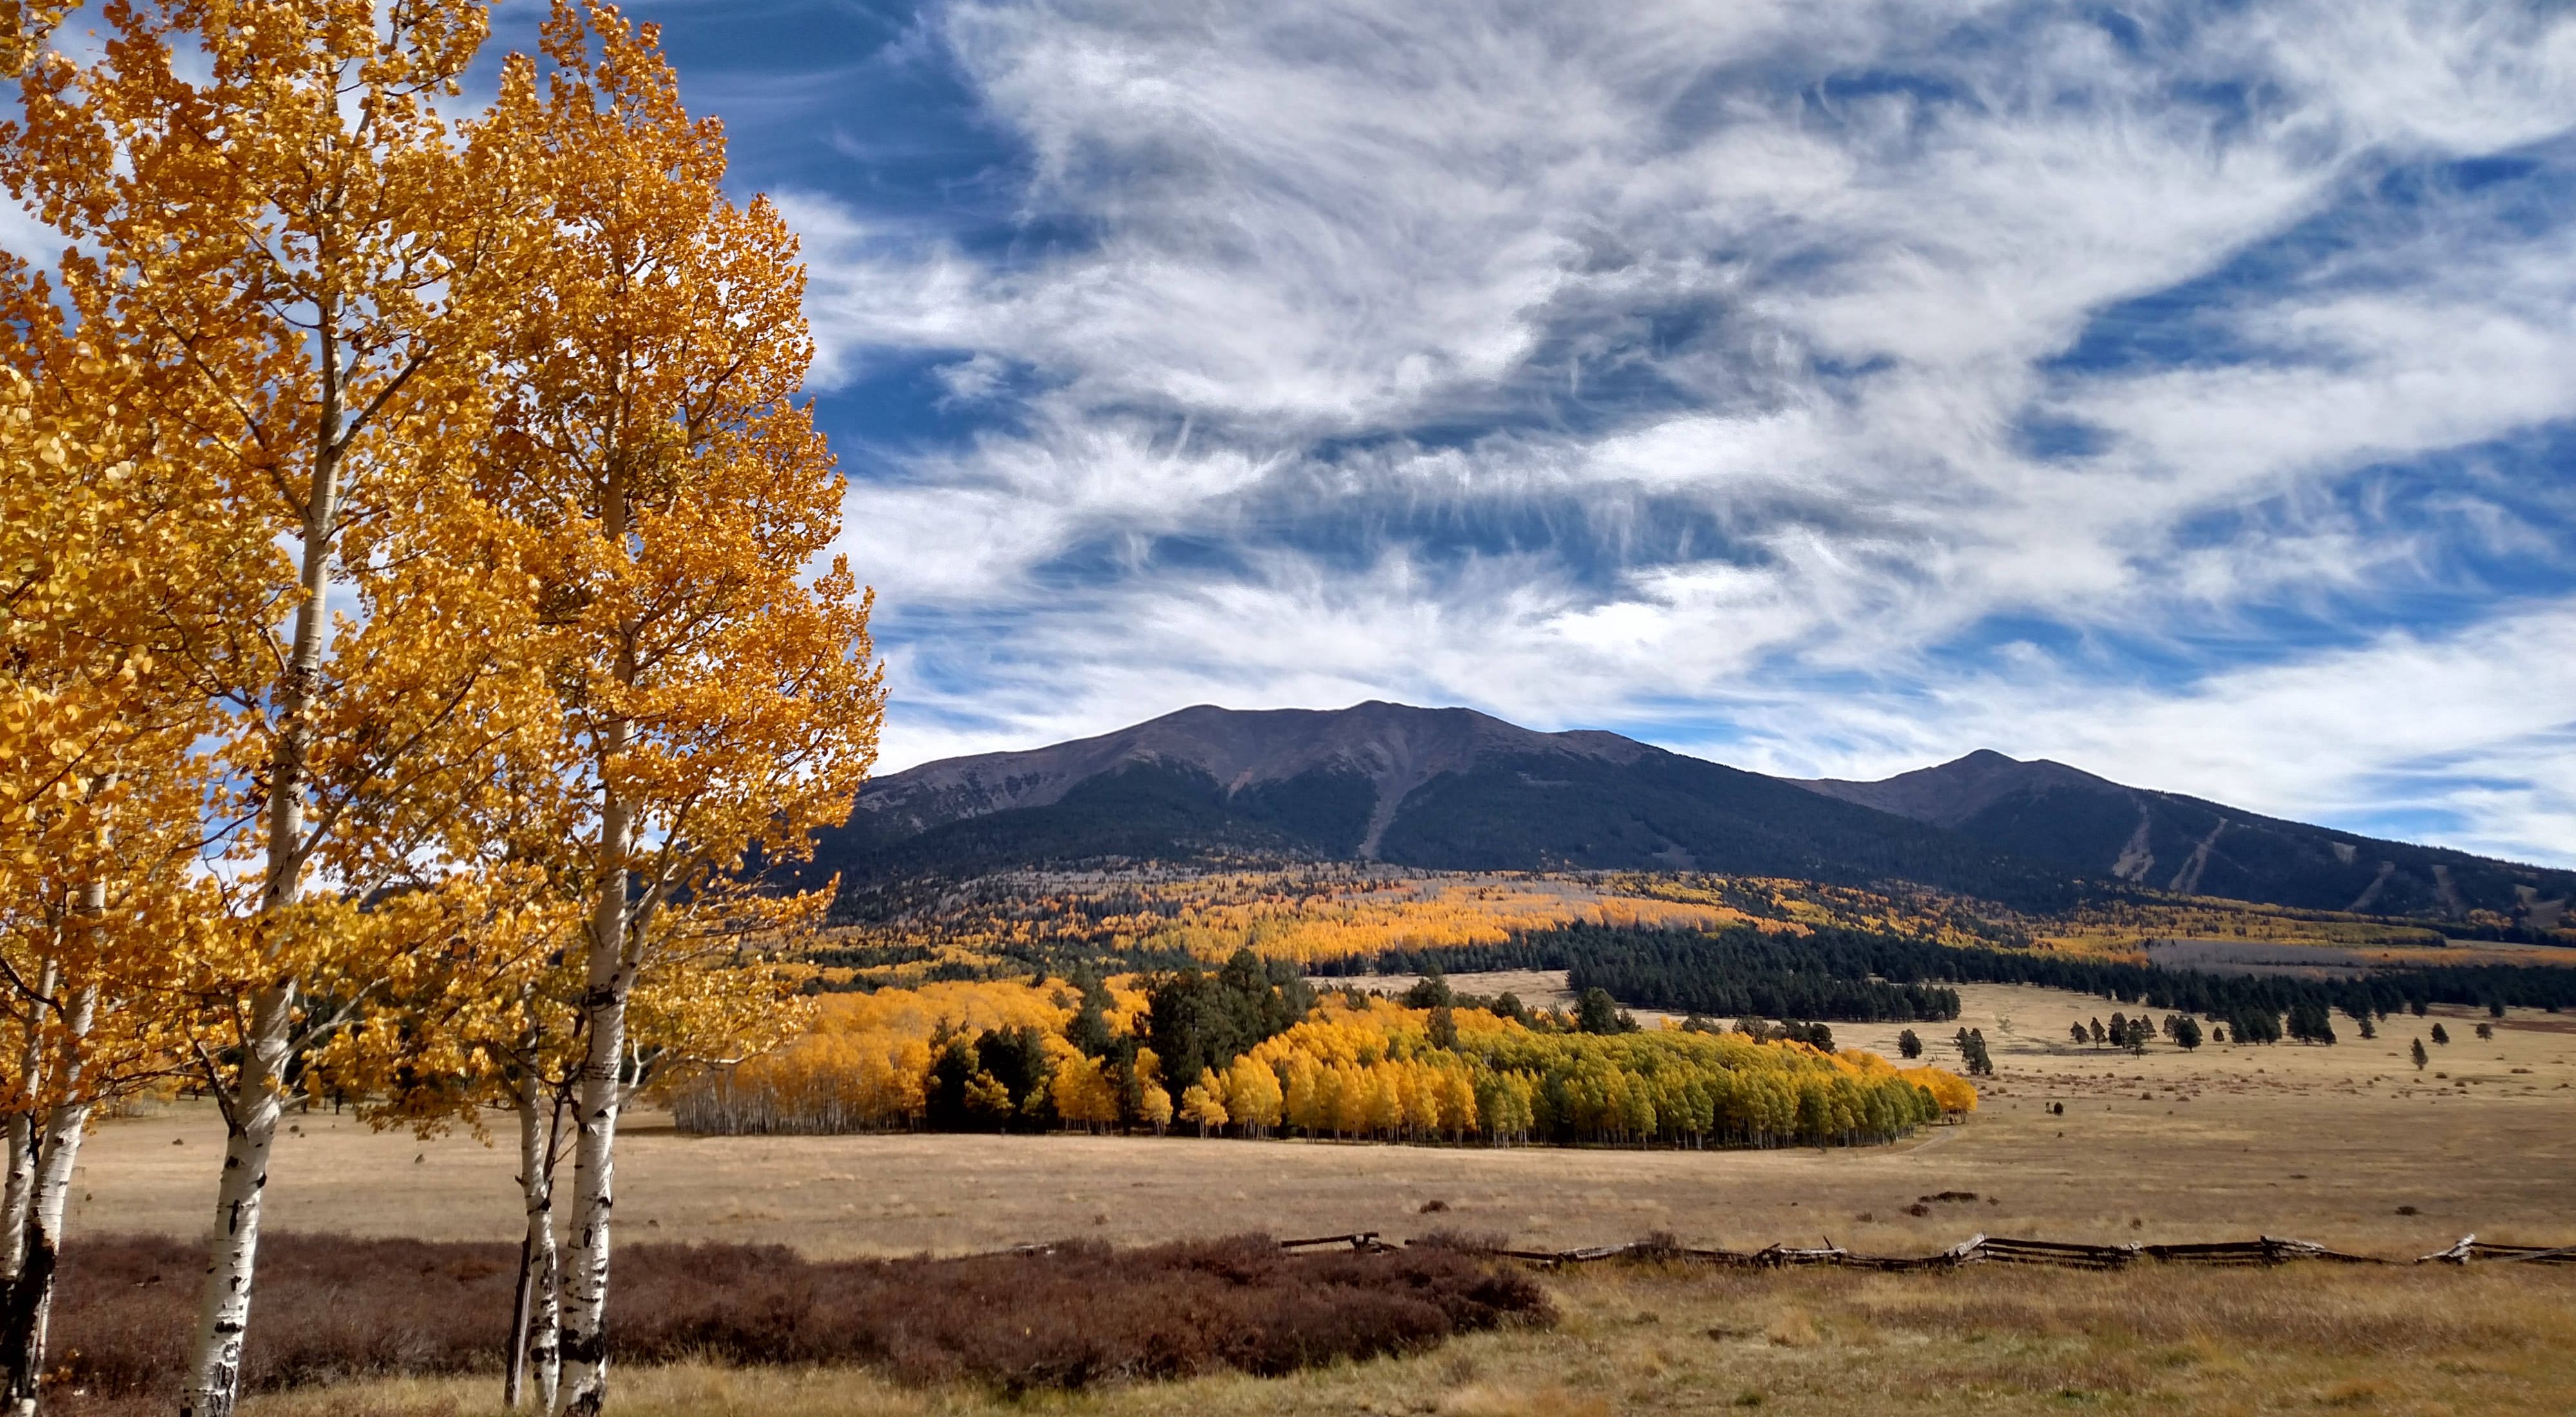 Aspen trees with golden fall leaves in the foreground with mountain peaks and more fall trees in the background.